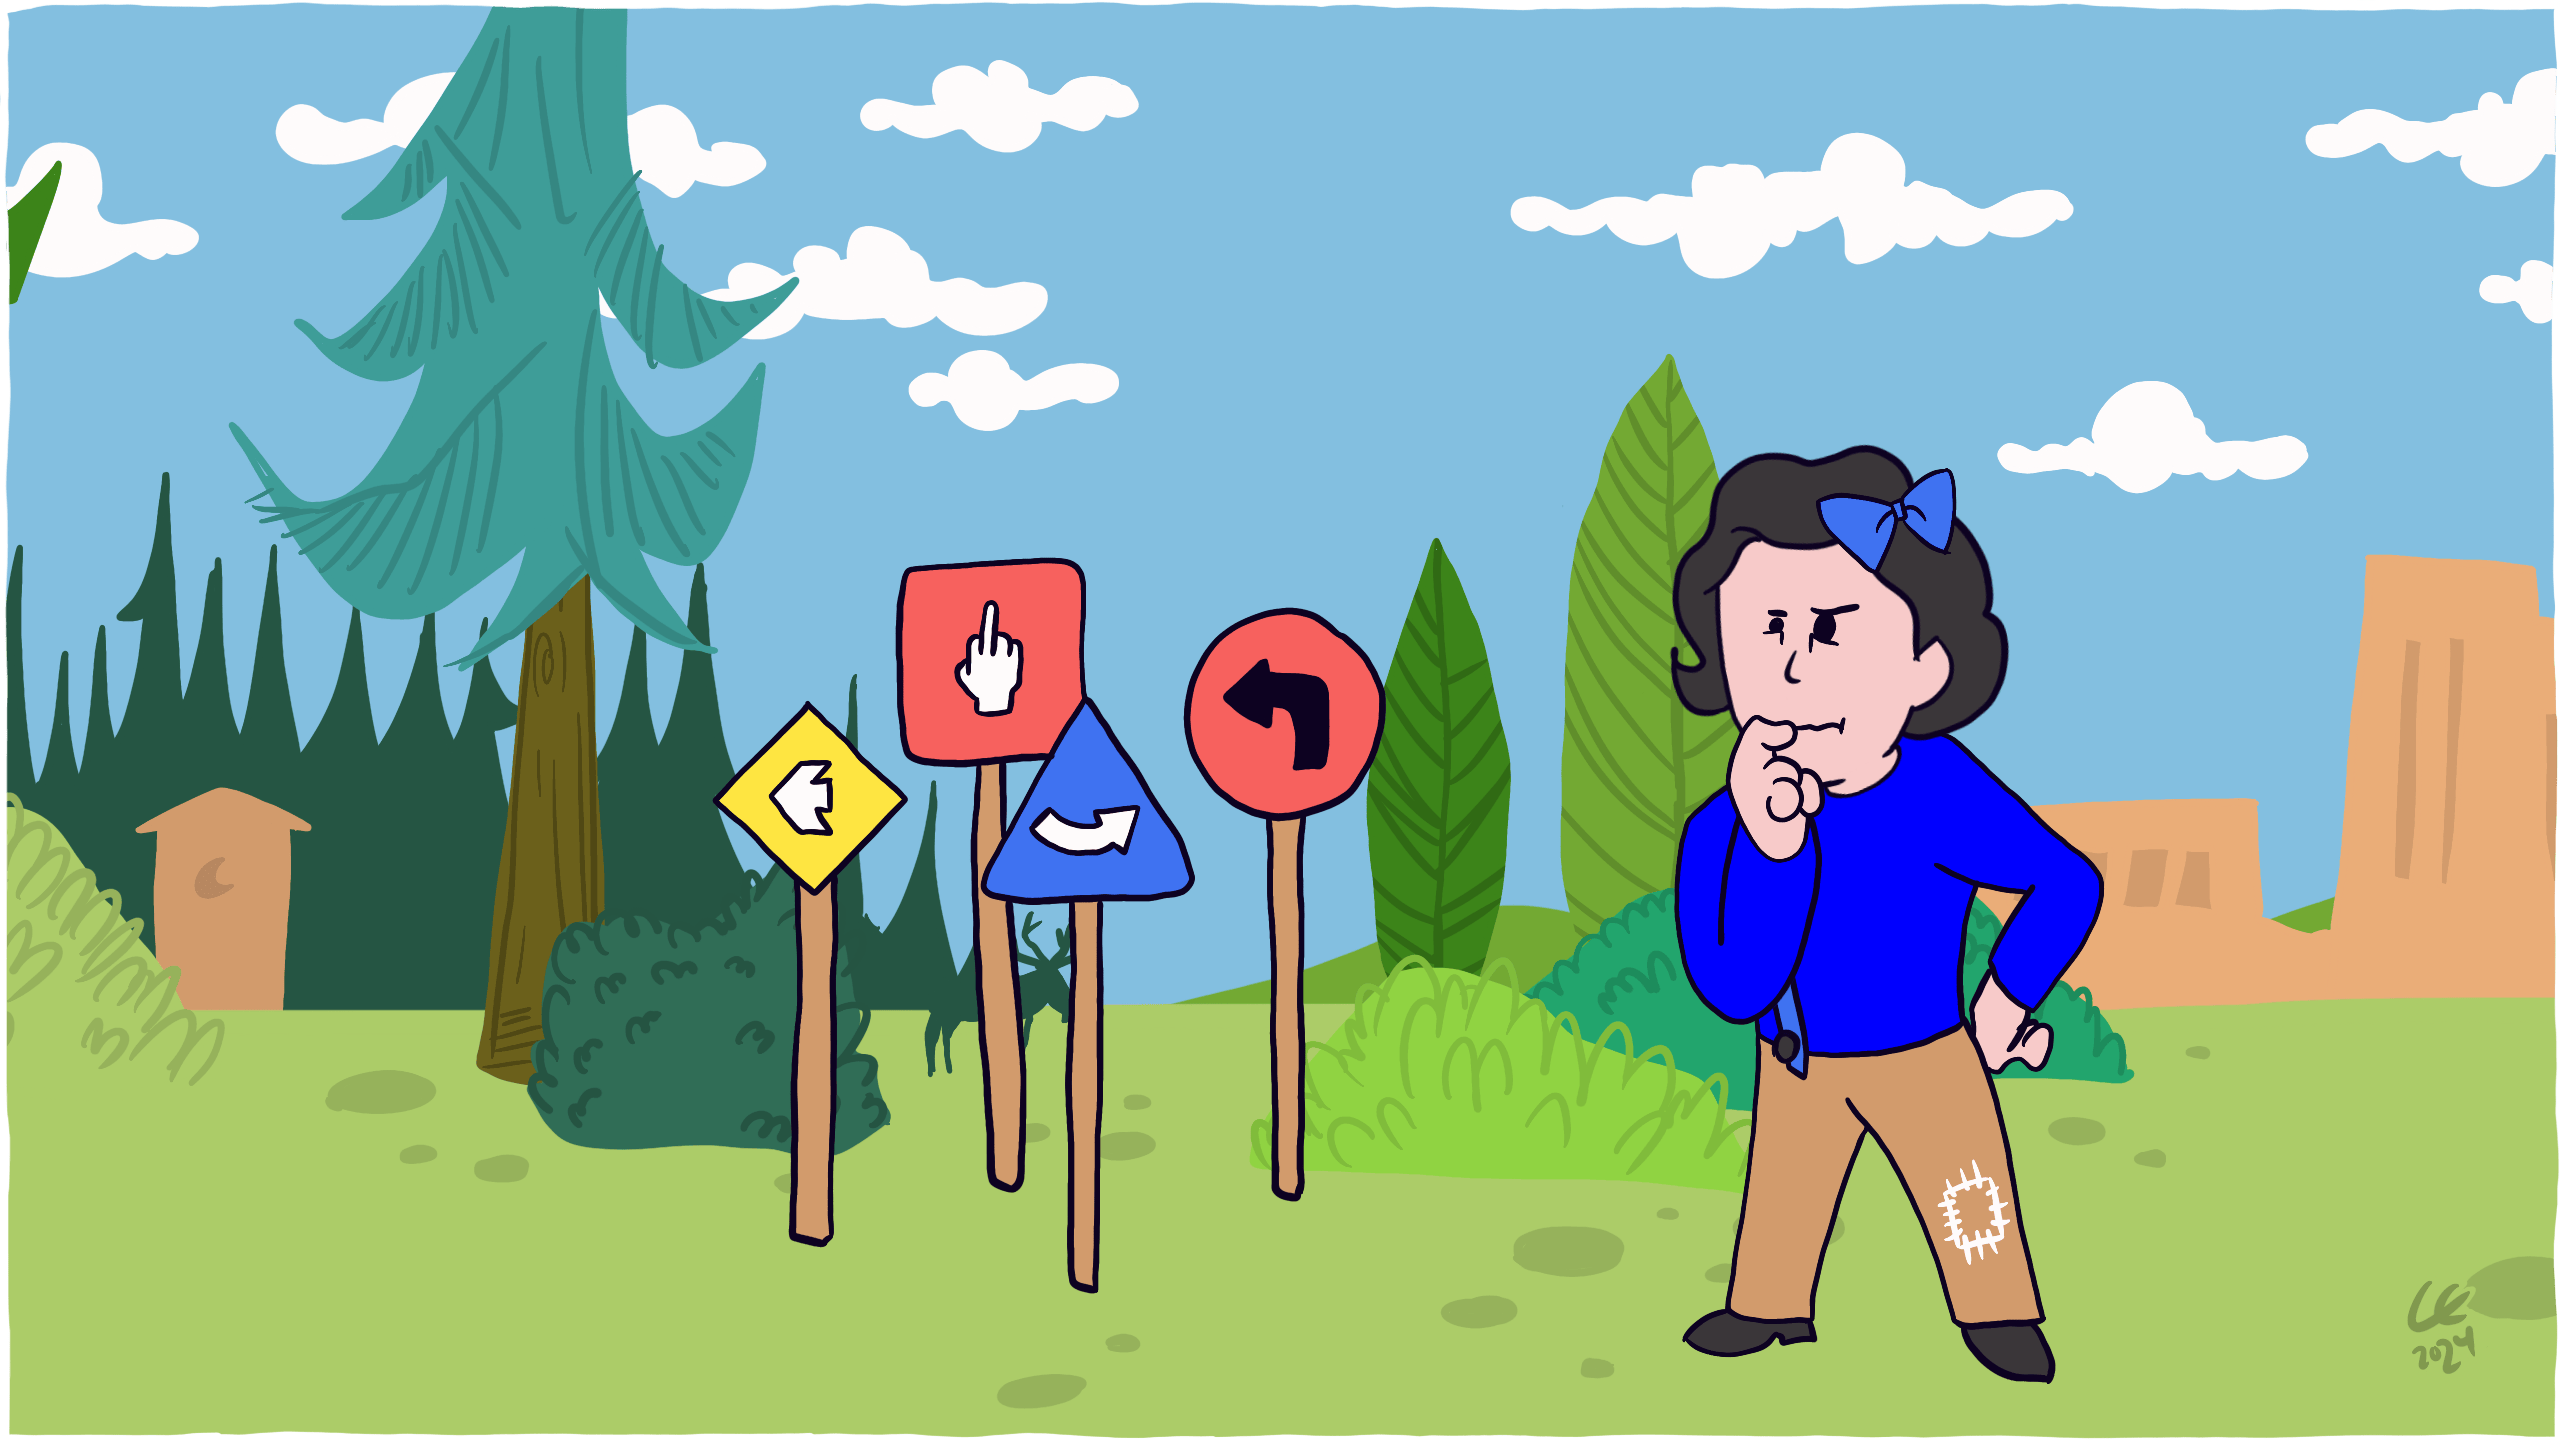 Frankie is confused by road signs pointing in different directions, one of which is giving Frankie the finger. Illustration by Carlos Eriksson.